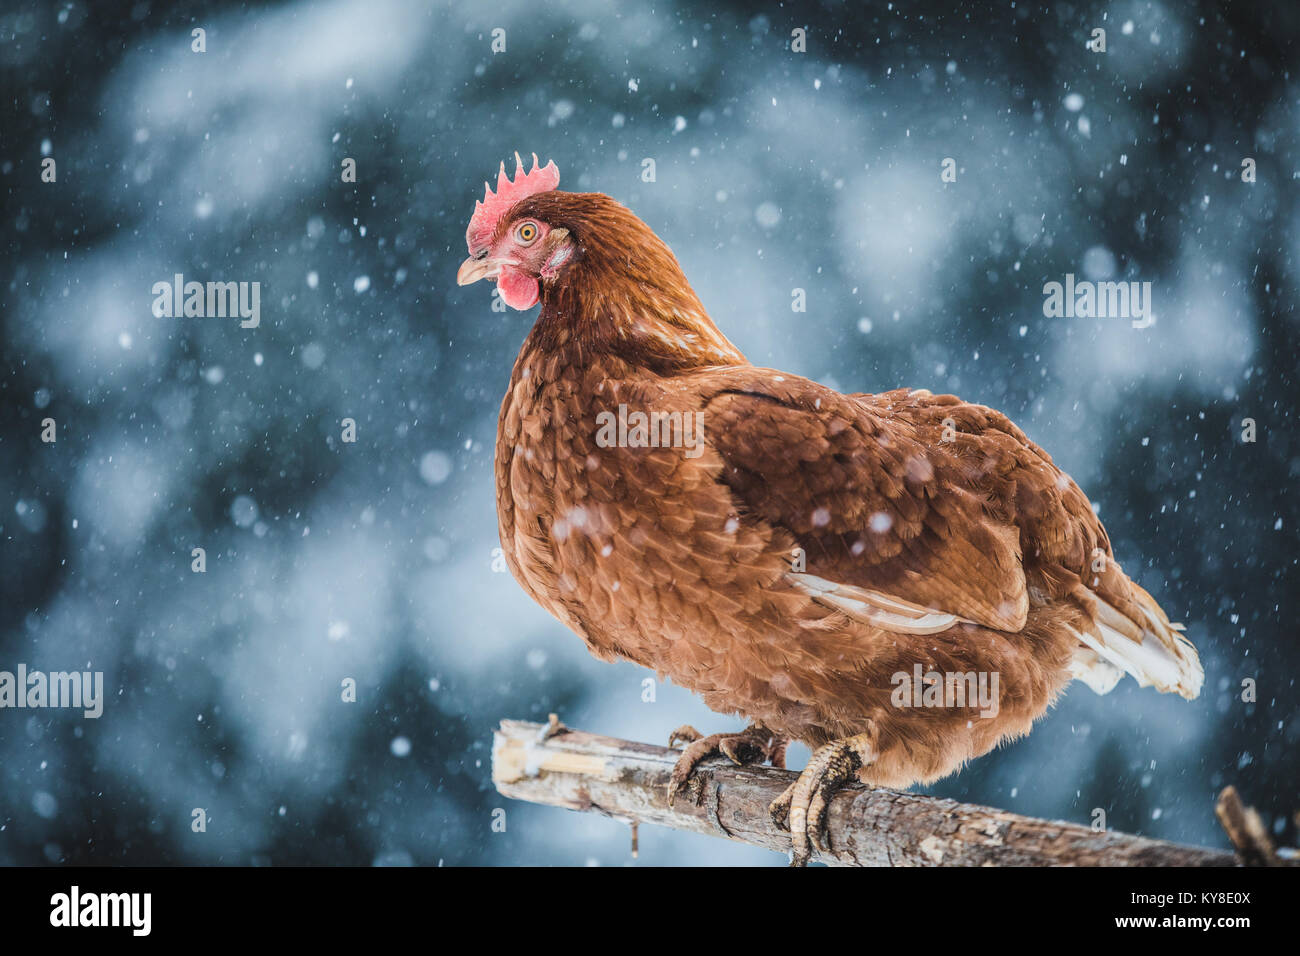 Free Range Domestic Rustic Eggs Chicken on a Wood Branch Outside during Winter Storm. Stock Photo